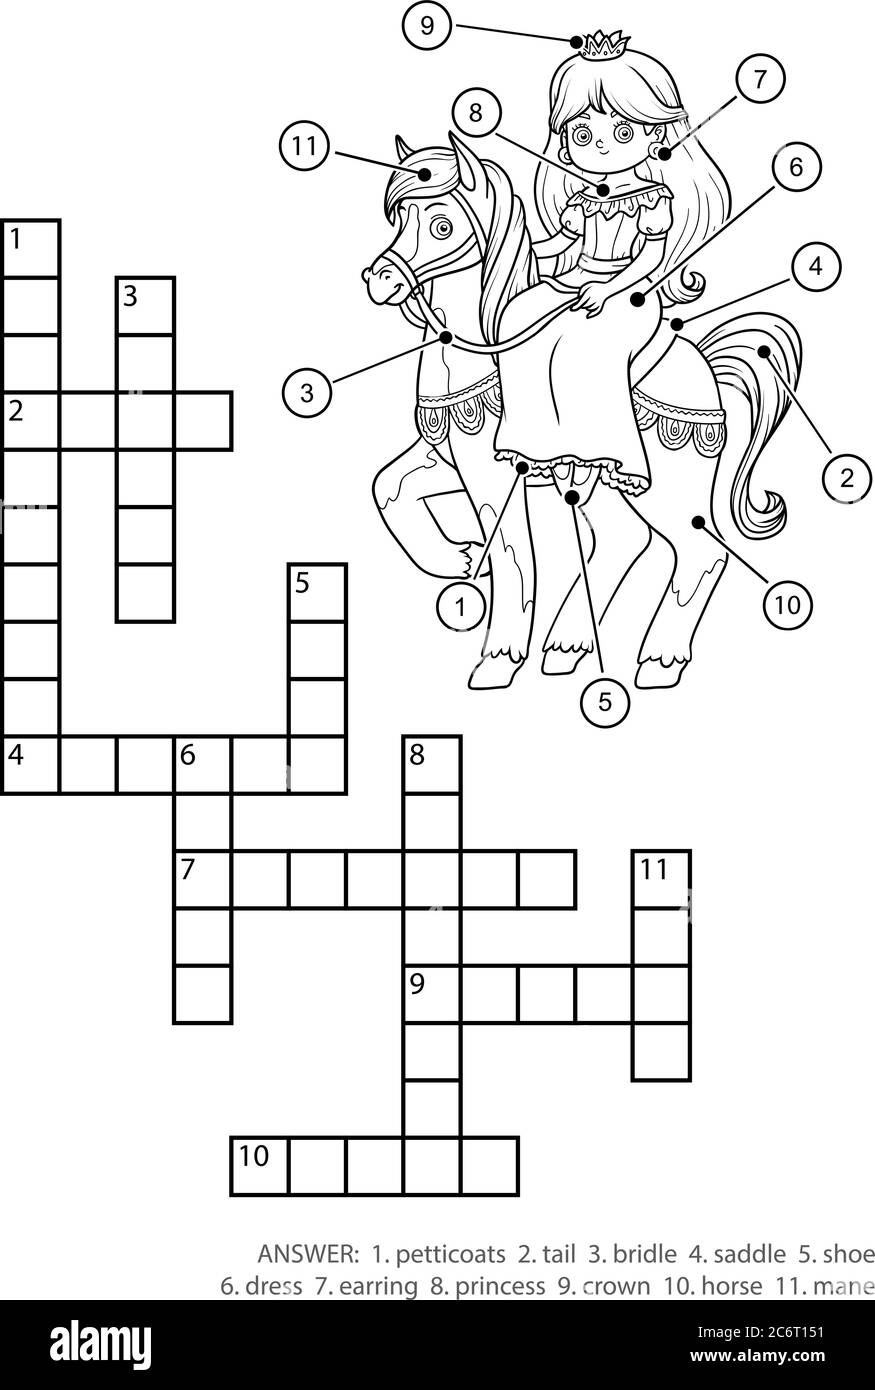 Vector colorless crossword, education game for children. Princess and horse Stock Vector